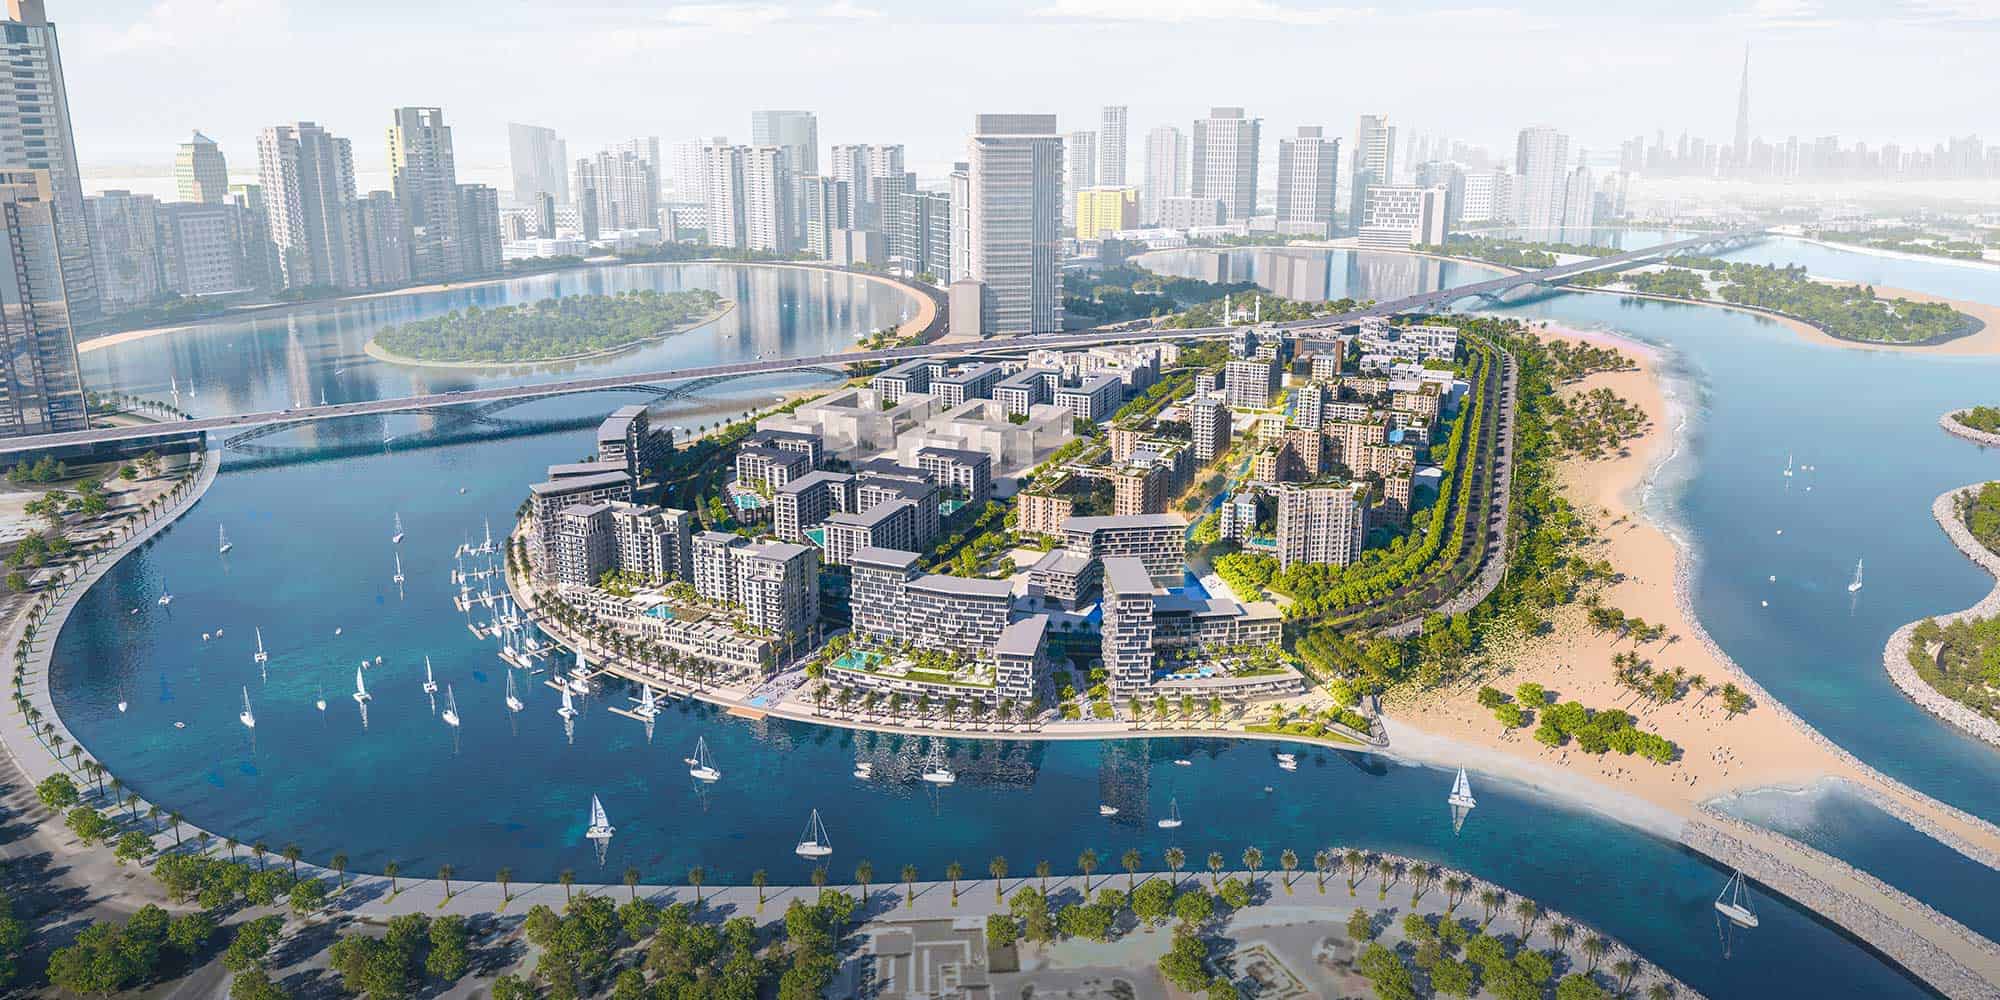 Maryam Island Sharjah Waterfront developments and projects we love in Sharjah